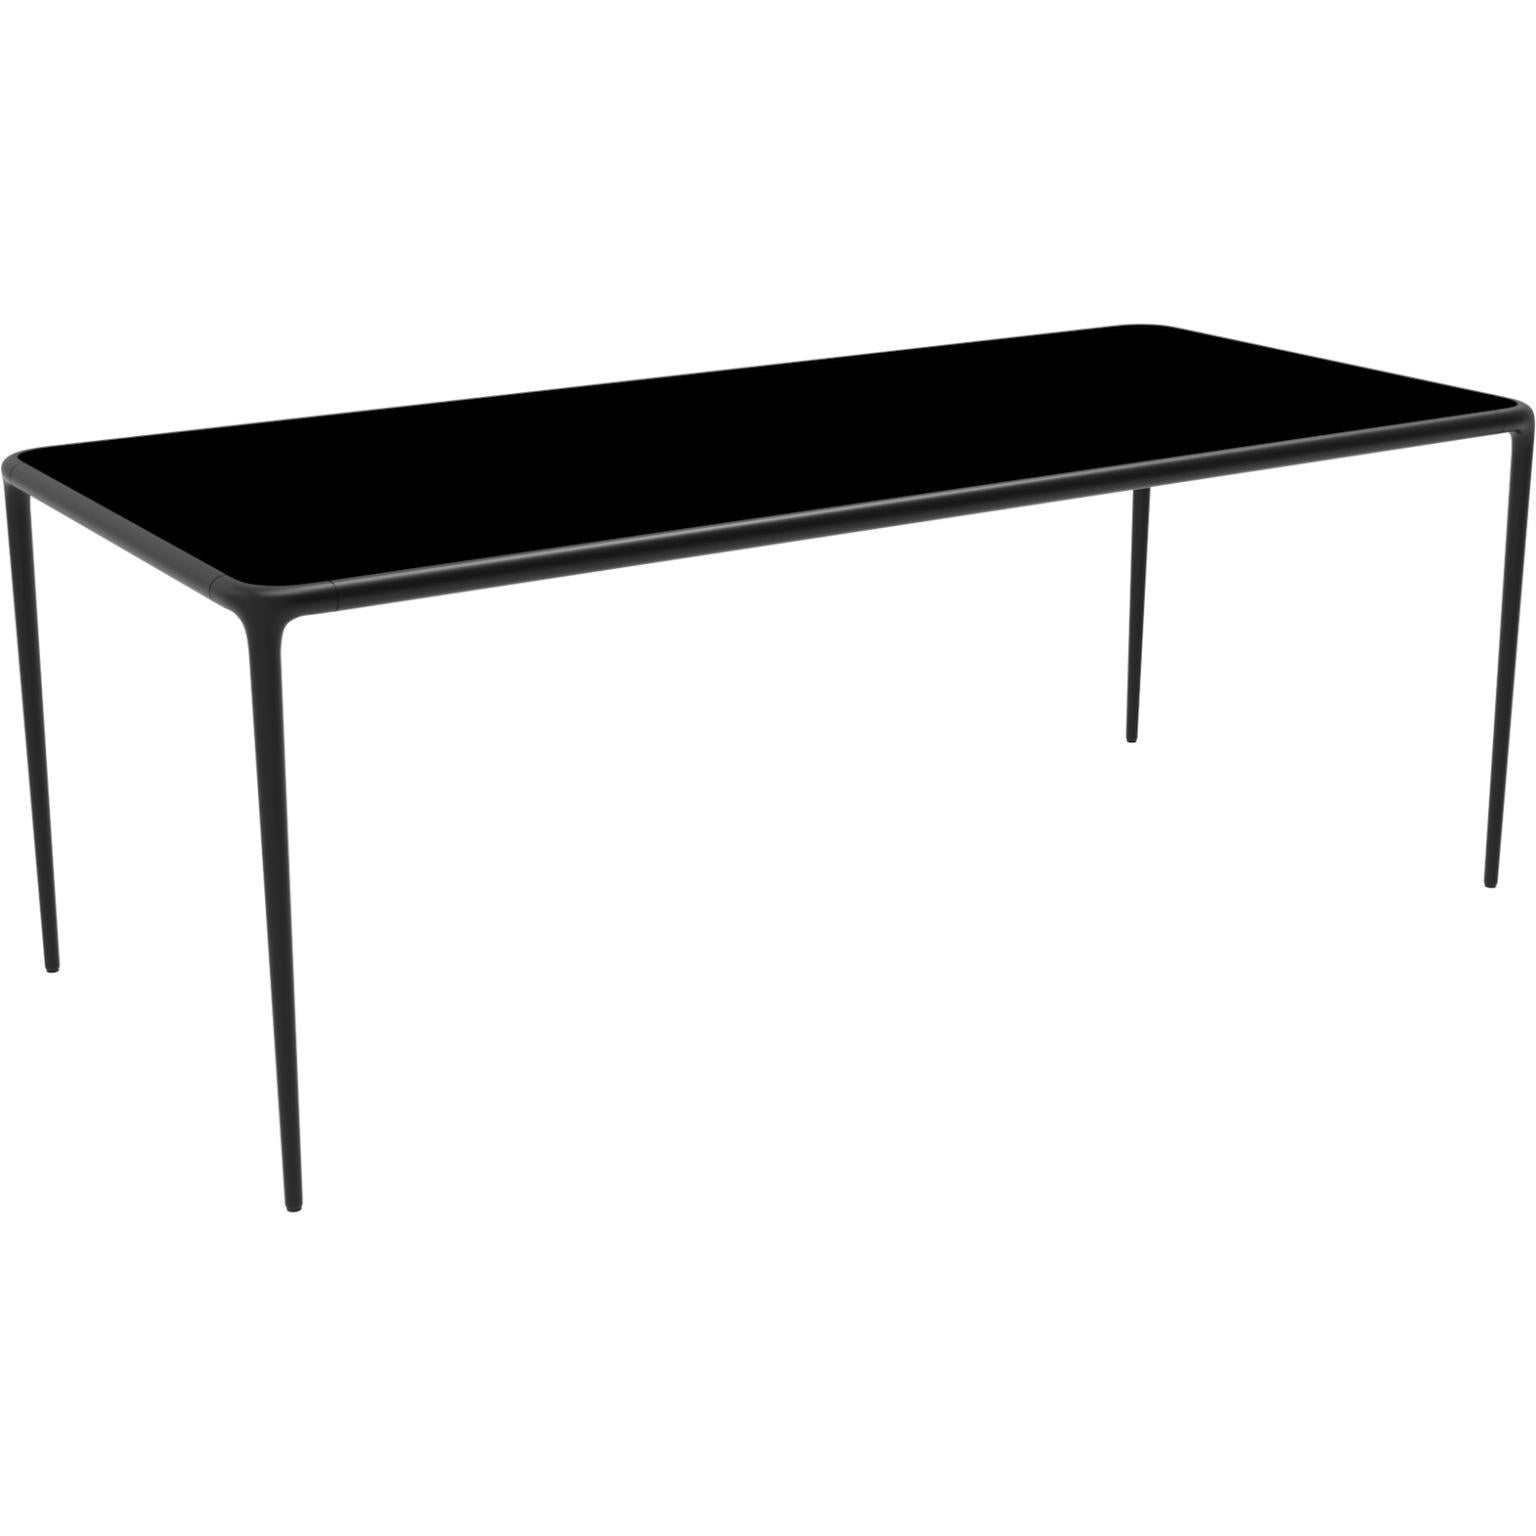 Xaloc black glass top 200 table by MOWEE
Dimensions: D200 x W90 x H74 cm
Material: Aluminum, tinted tempered glass top.
Also available in different aluminum colors and finishes (HPL Black Edge or Neolith). 

Xaloc synthesizes the lines of